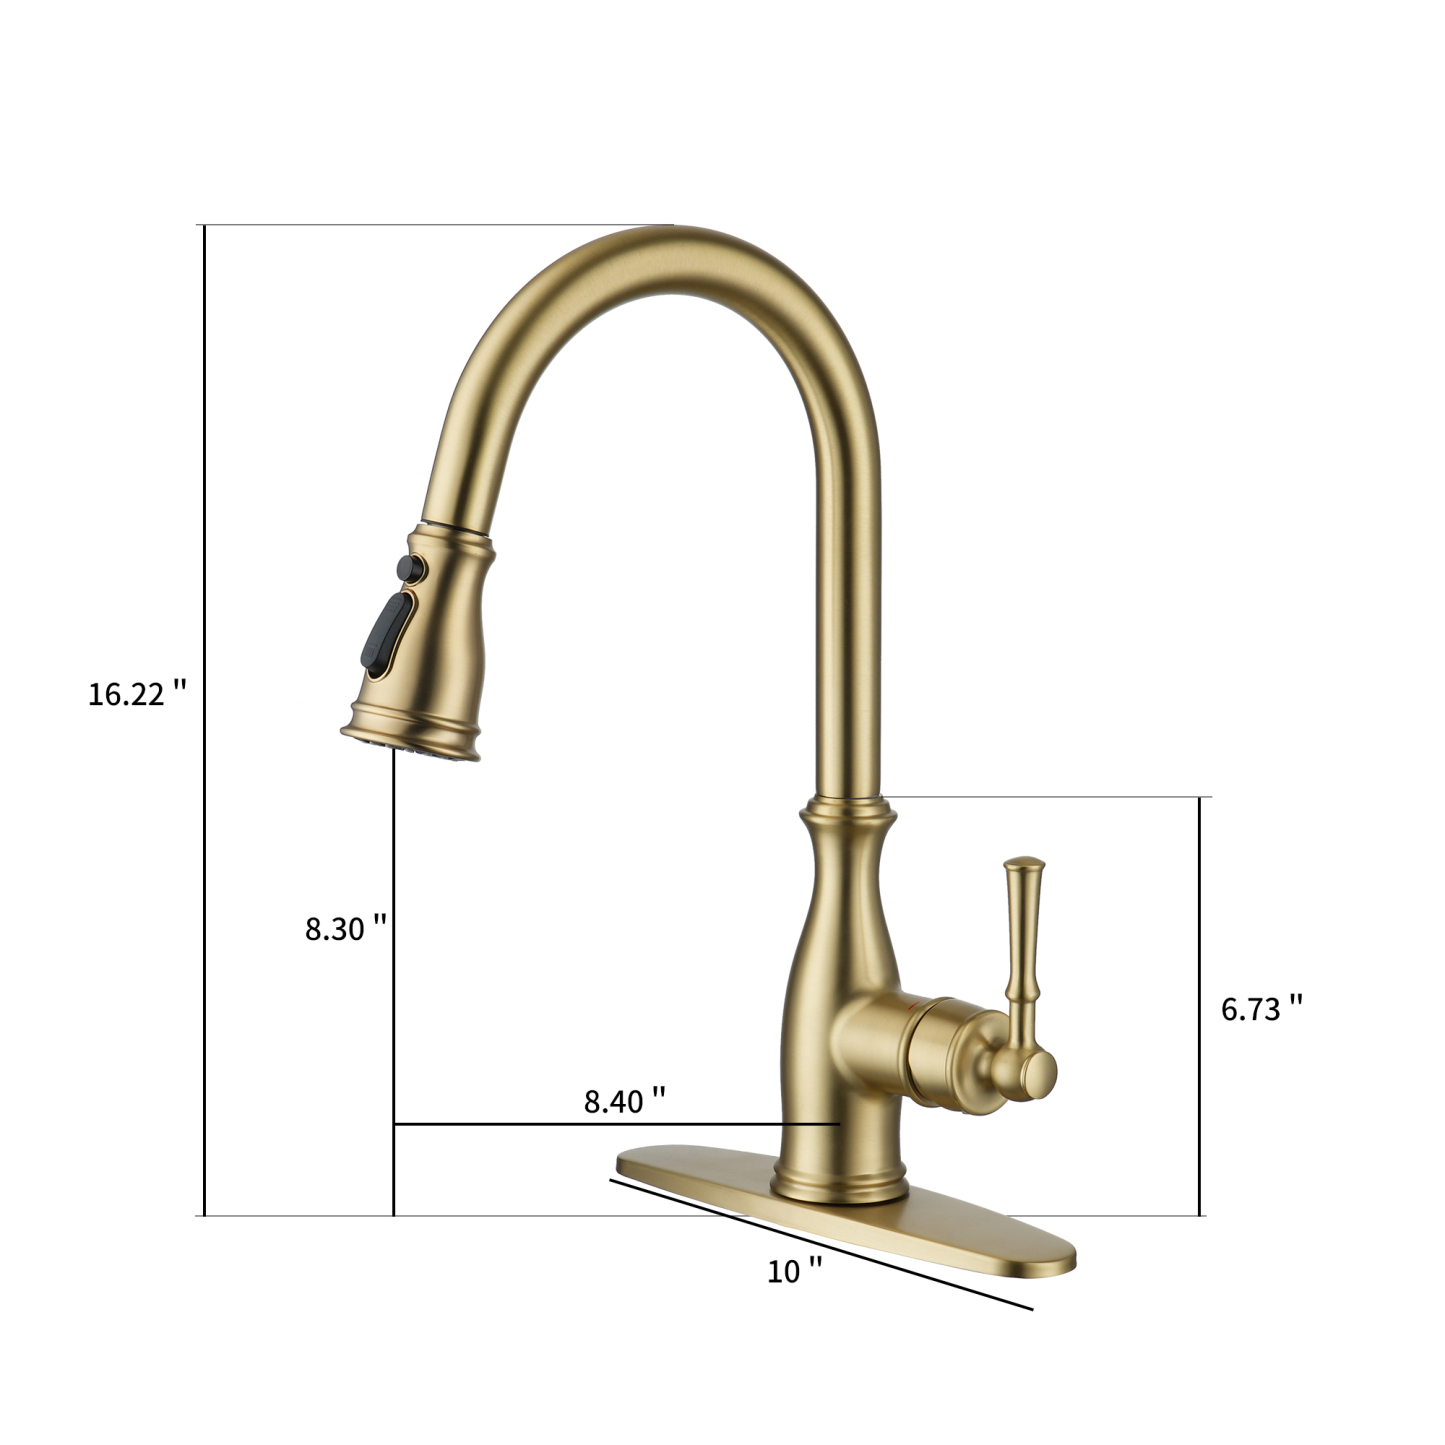 3-Spray Patterns 1.8 GPM Single Handle Brushed Nickel Pull-Out Kitchen Faucet With Brush